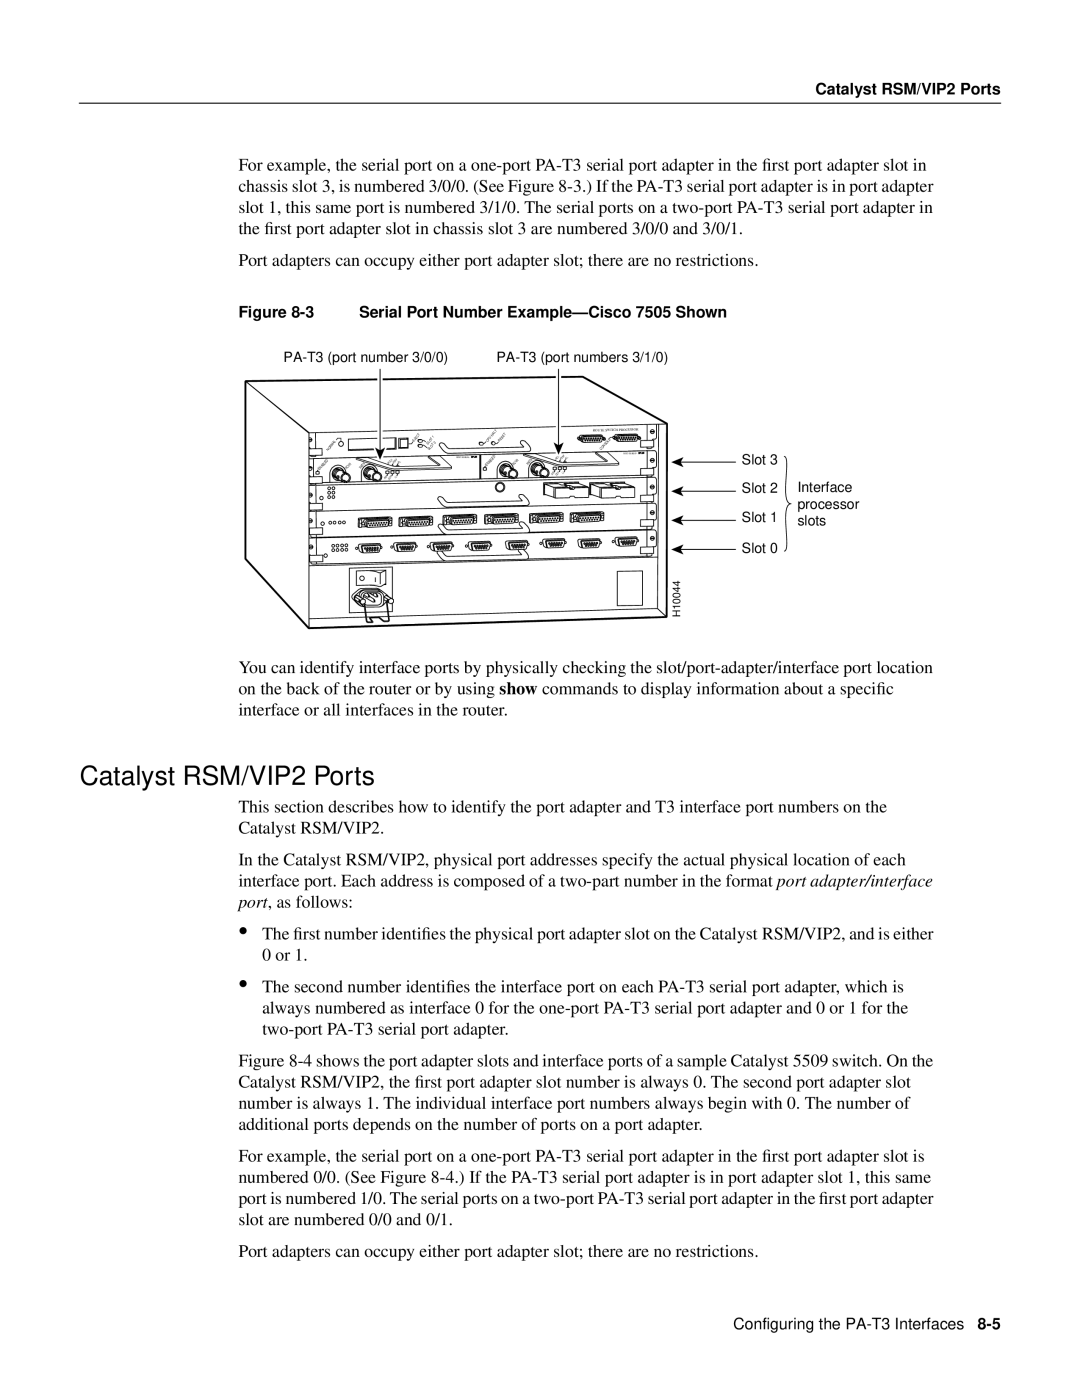 Cisco Systems PA-T3 manual Catalyst RSM/VIP2 Ports, 3 Serial Port Number Example-Cisco 7505 Shown 